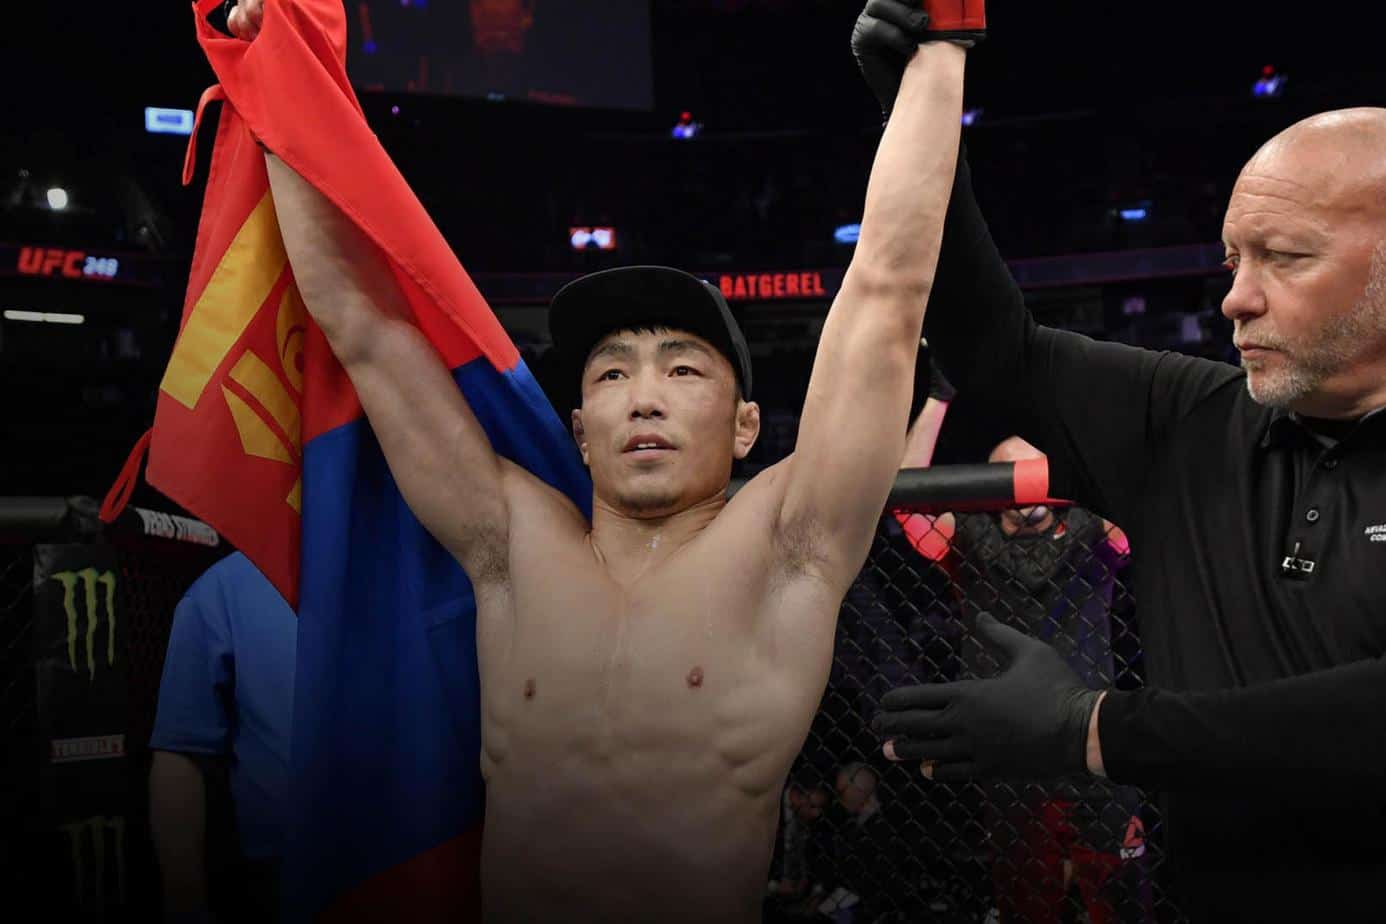 Danaa “Storm” Batgerel – From the Mongolian Stepps to the Octagon – Preview